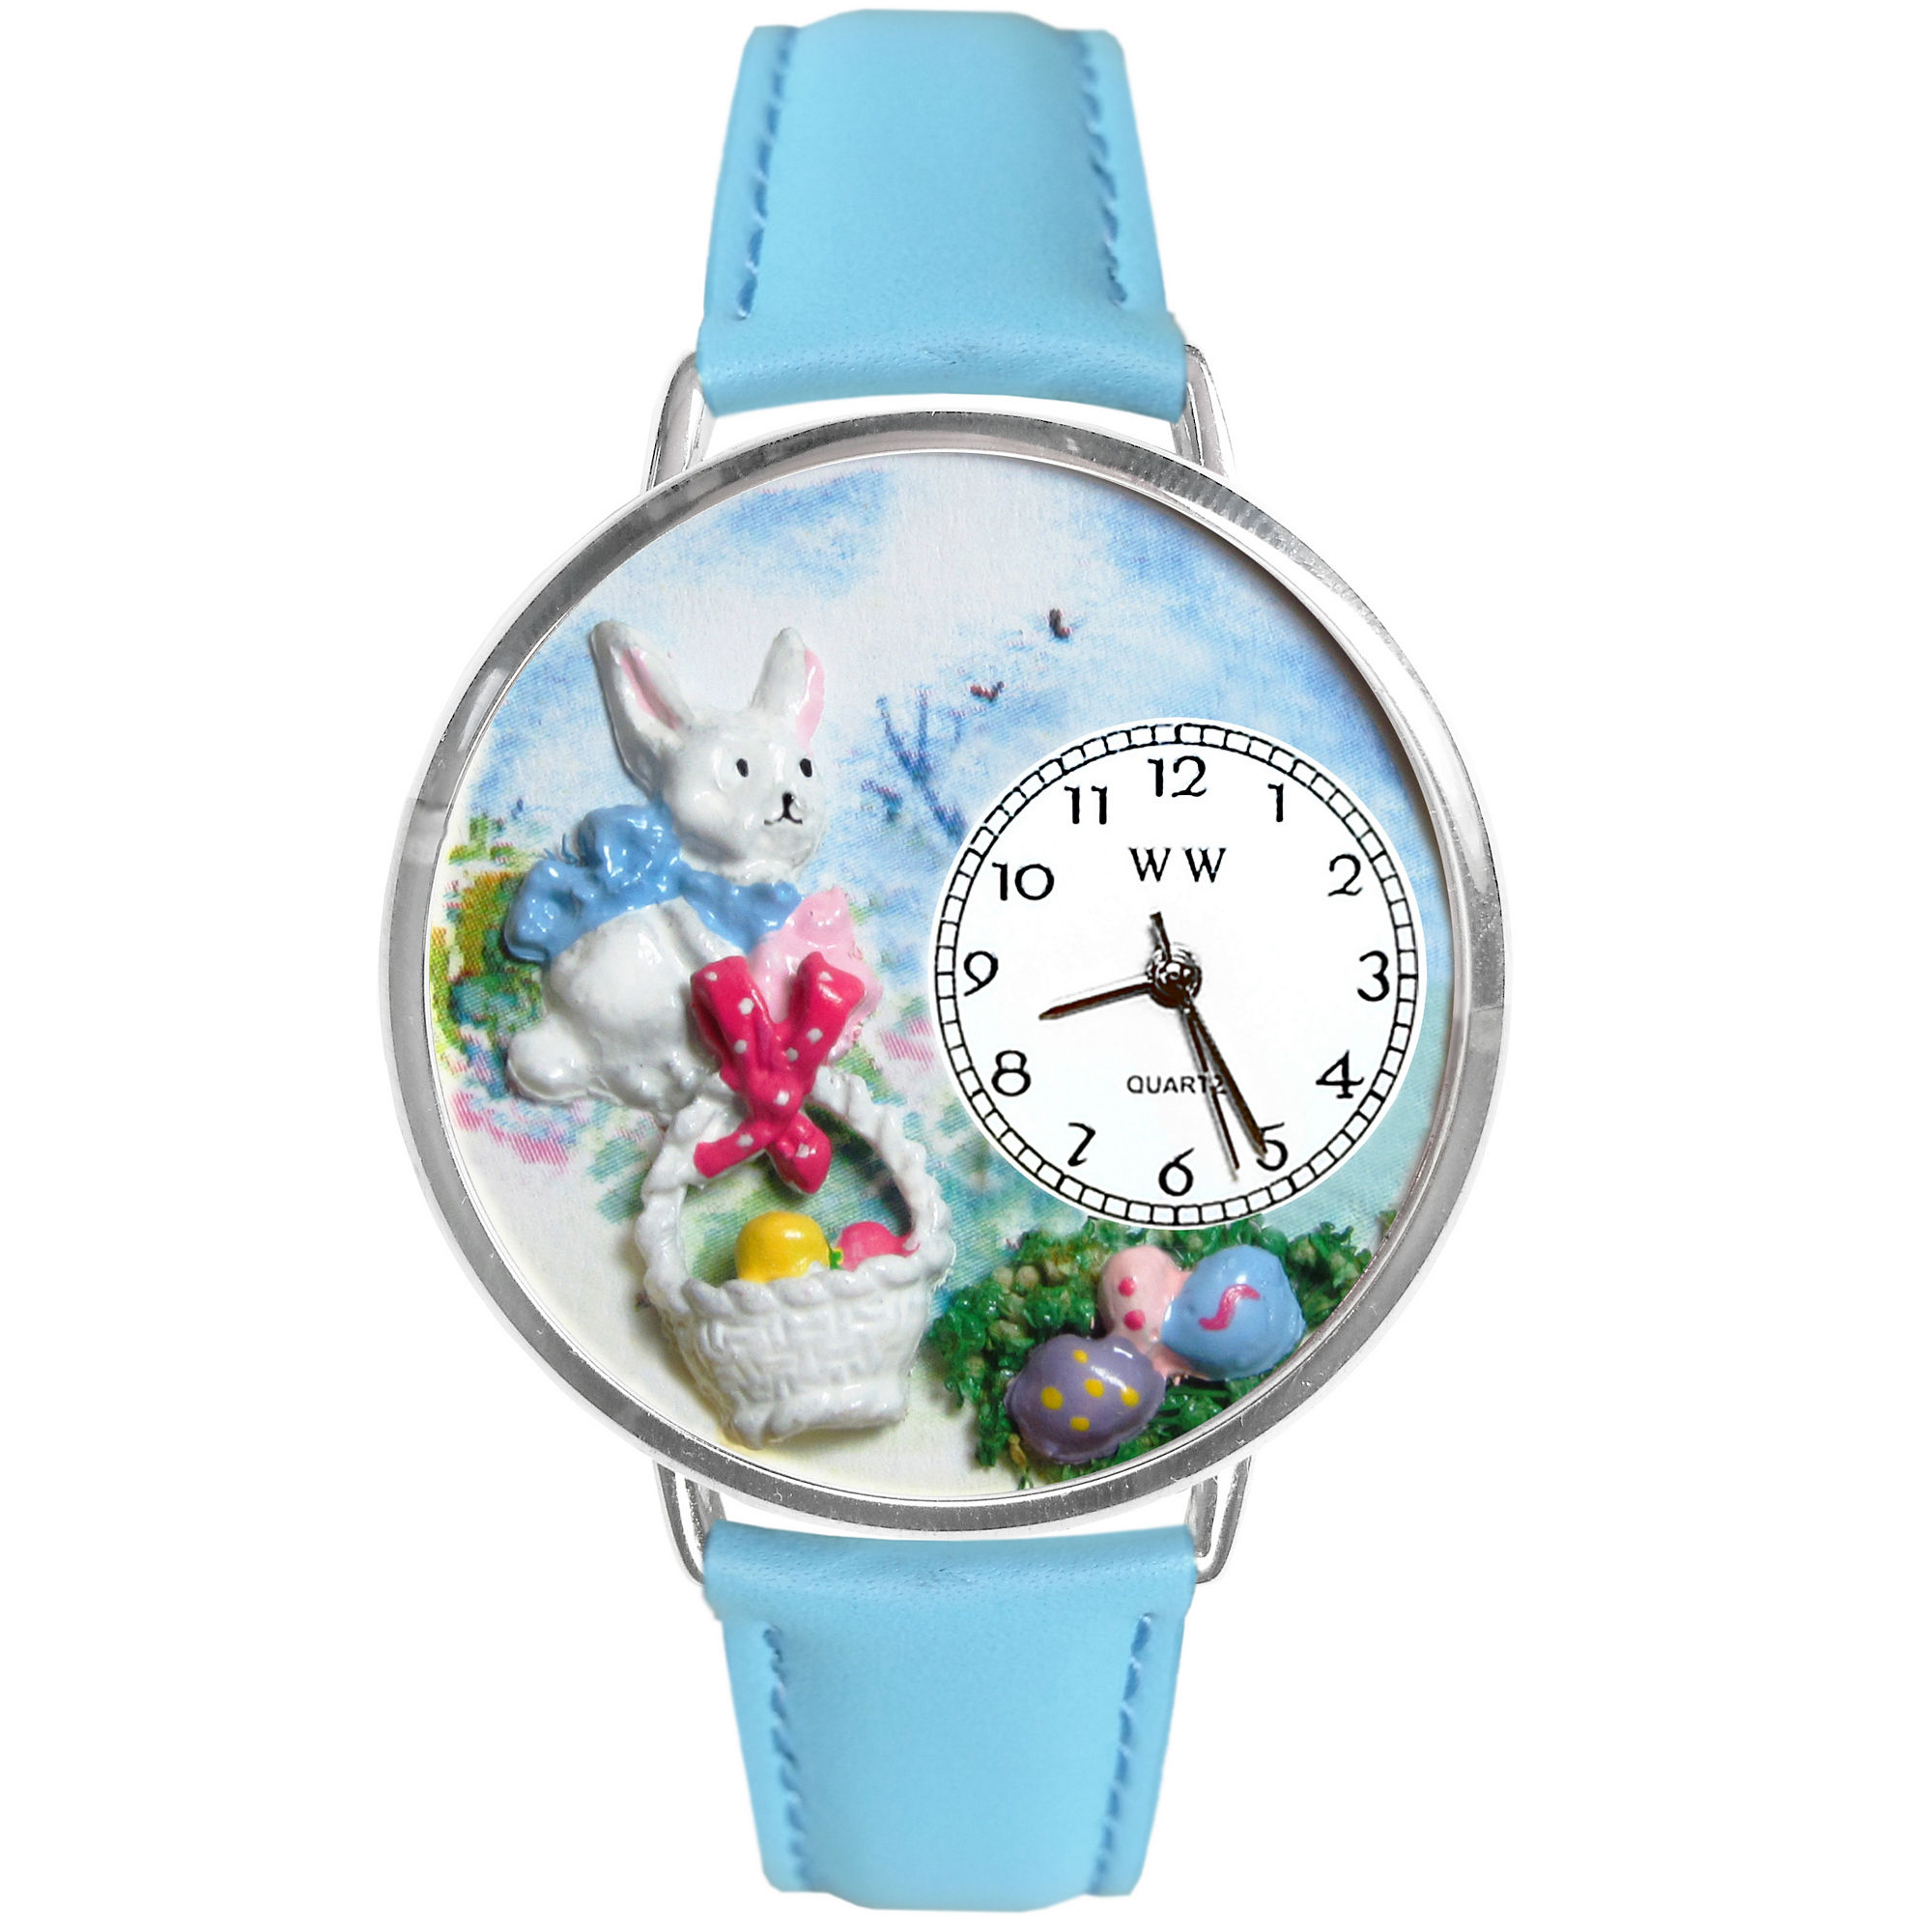 Whimsical Watches Personalized Easter Egg Womens Silver-Tone Bezel Light Blue Leather Strap Watch